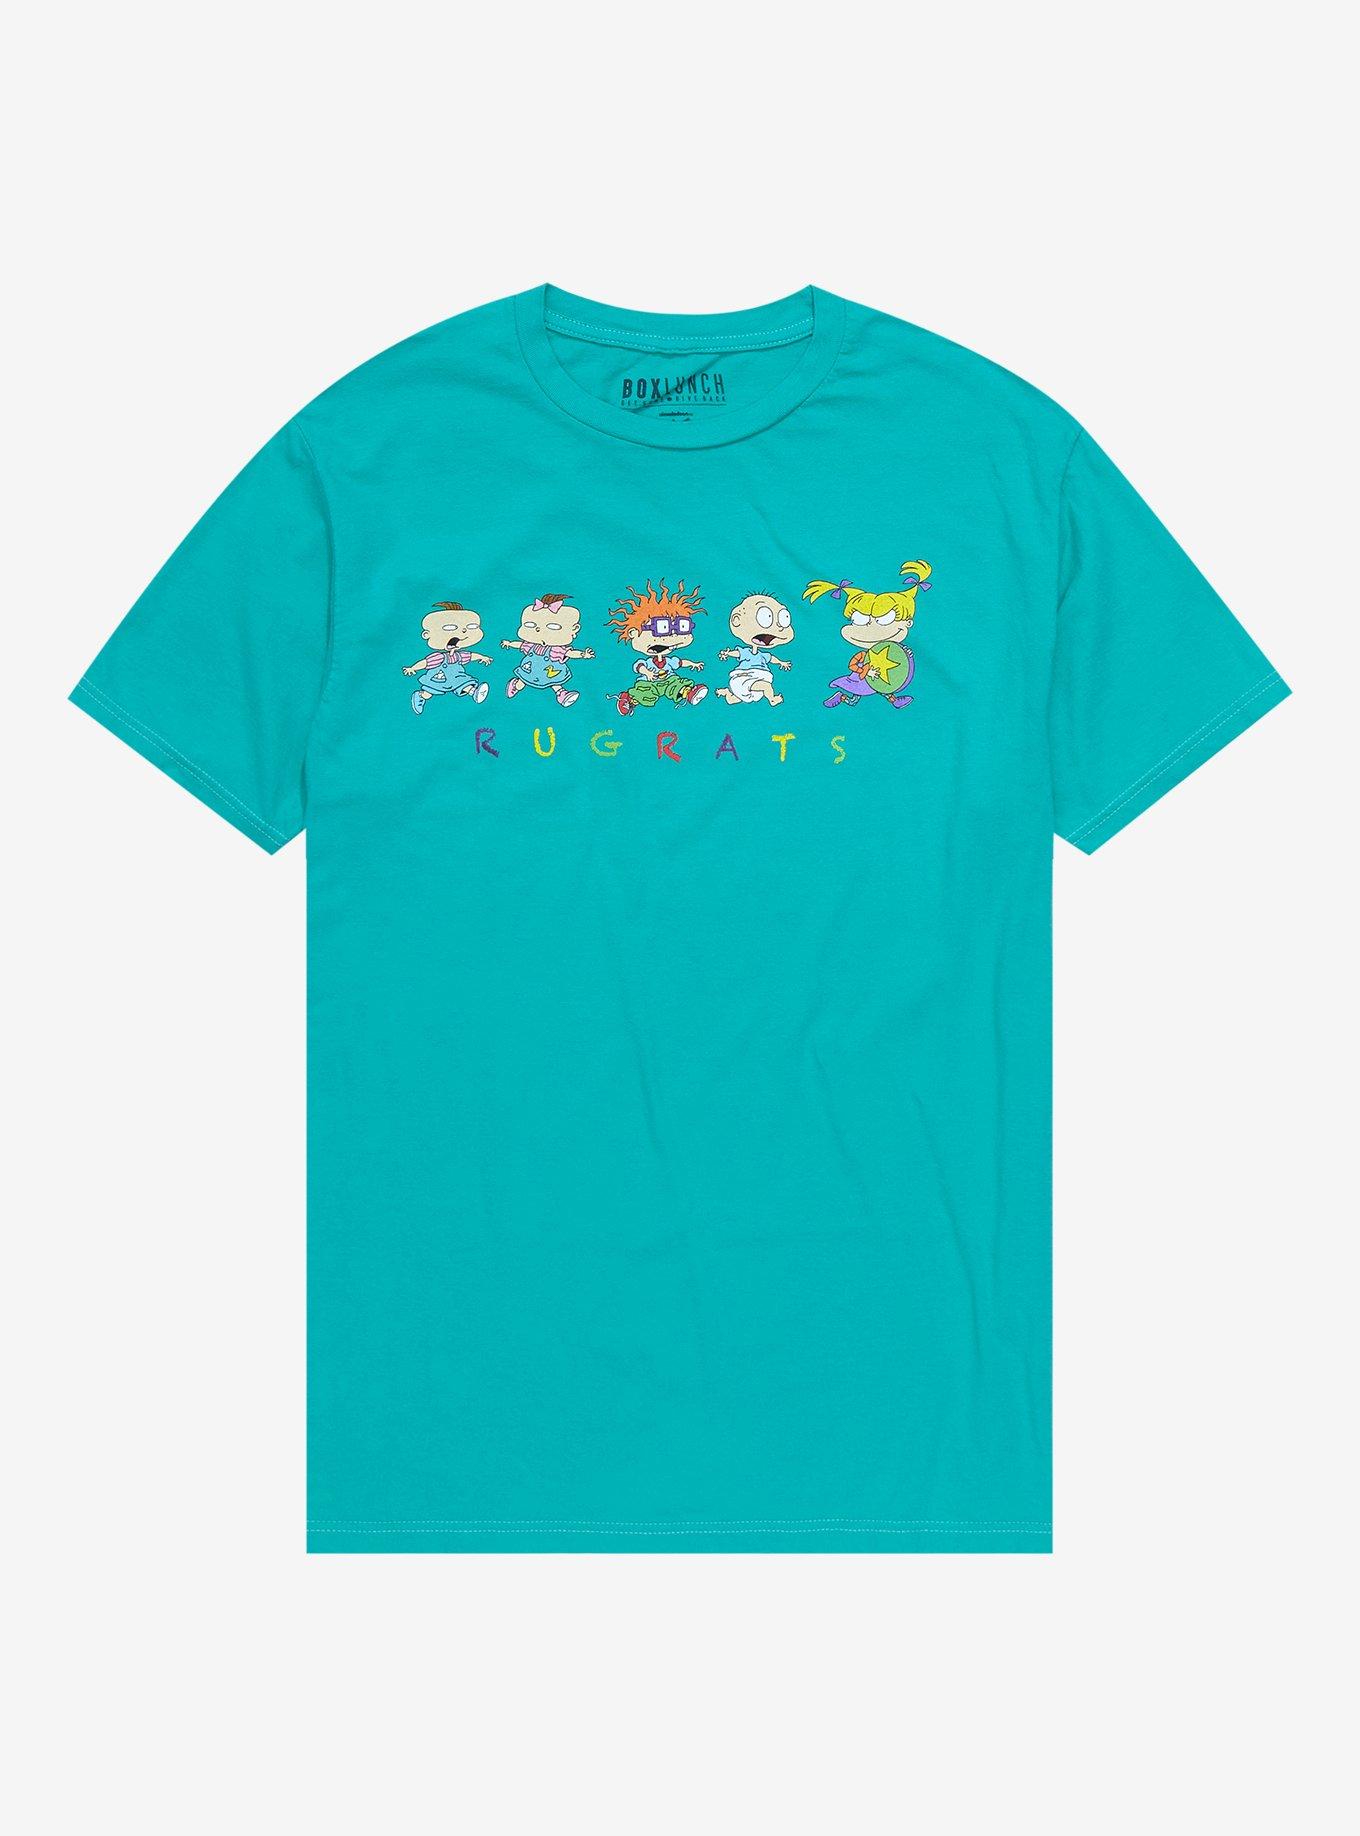 Nickelodeon Rugrats Group Running T-Shirt - BoxLunch Exclusive | BoxLunch